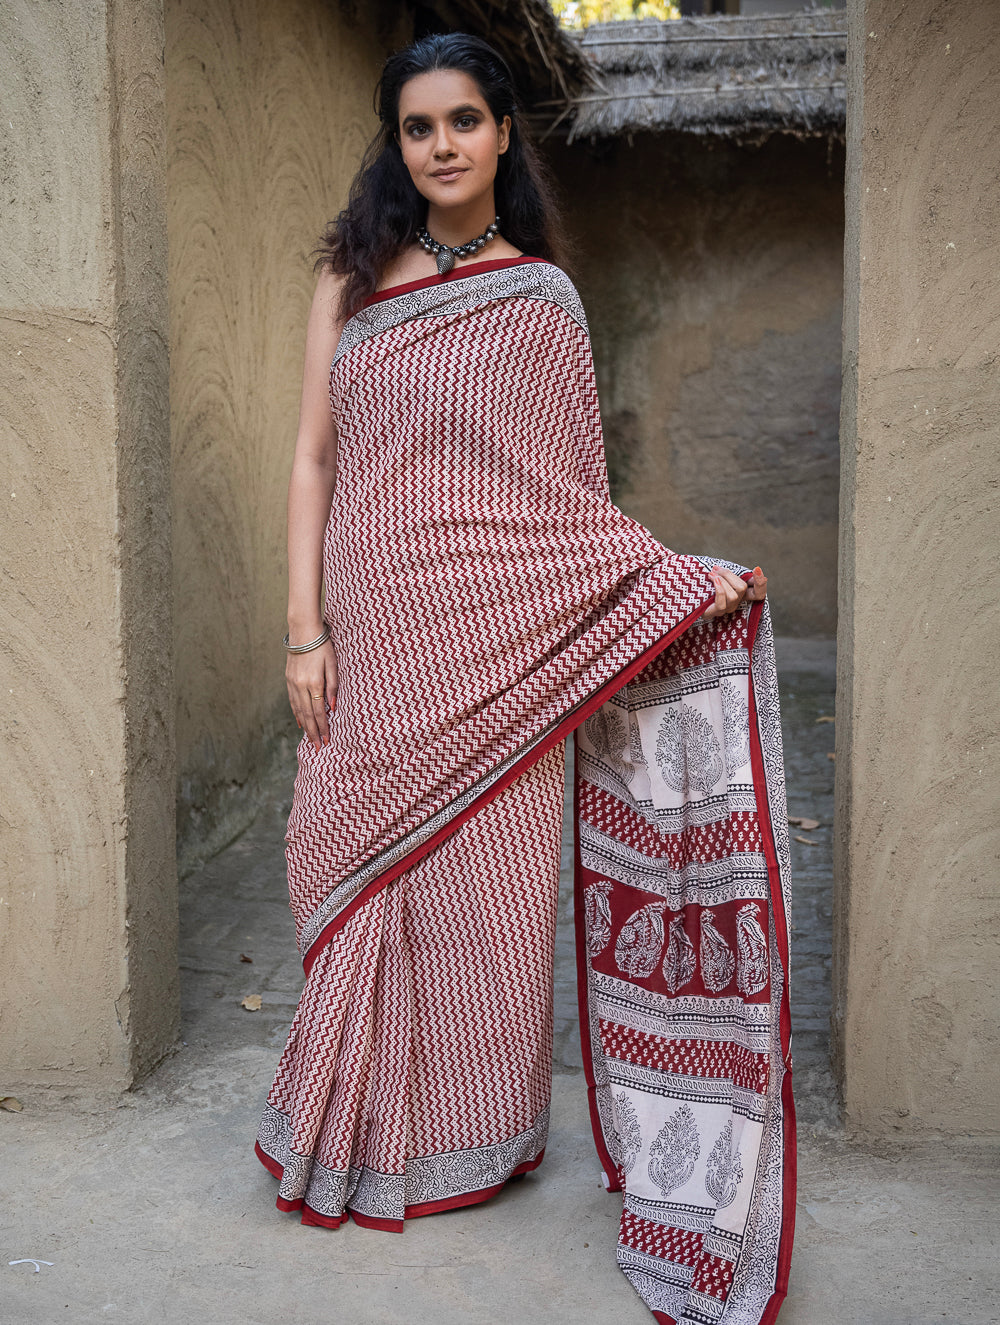 Load image into Gallery viewer, Exclusive Bagh Hand Block Printed Cotton Saree - Red Zigzags